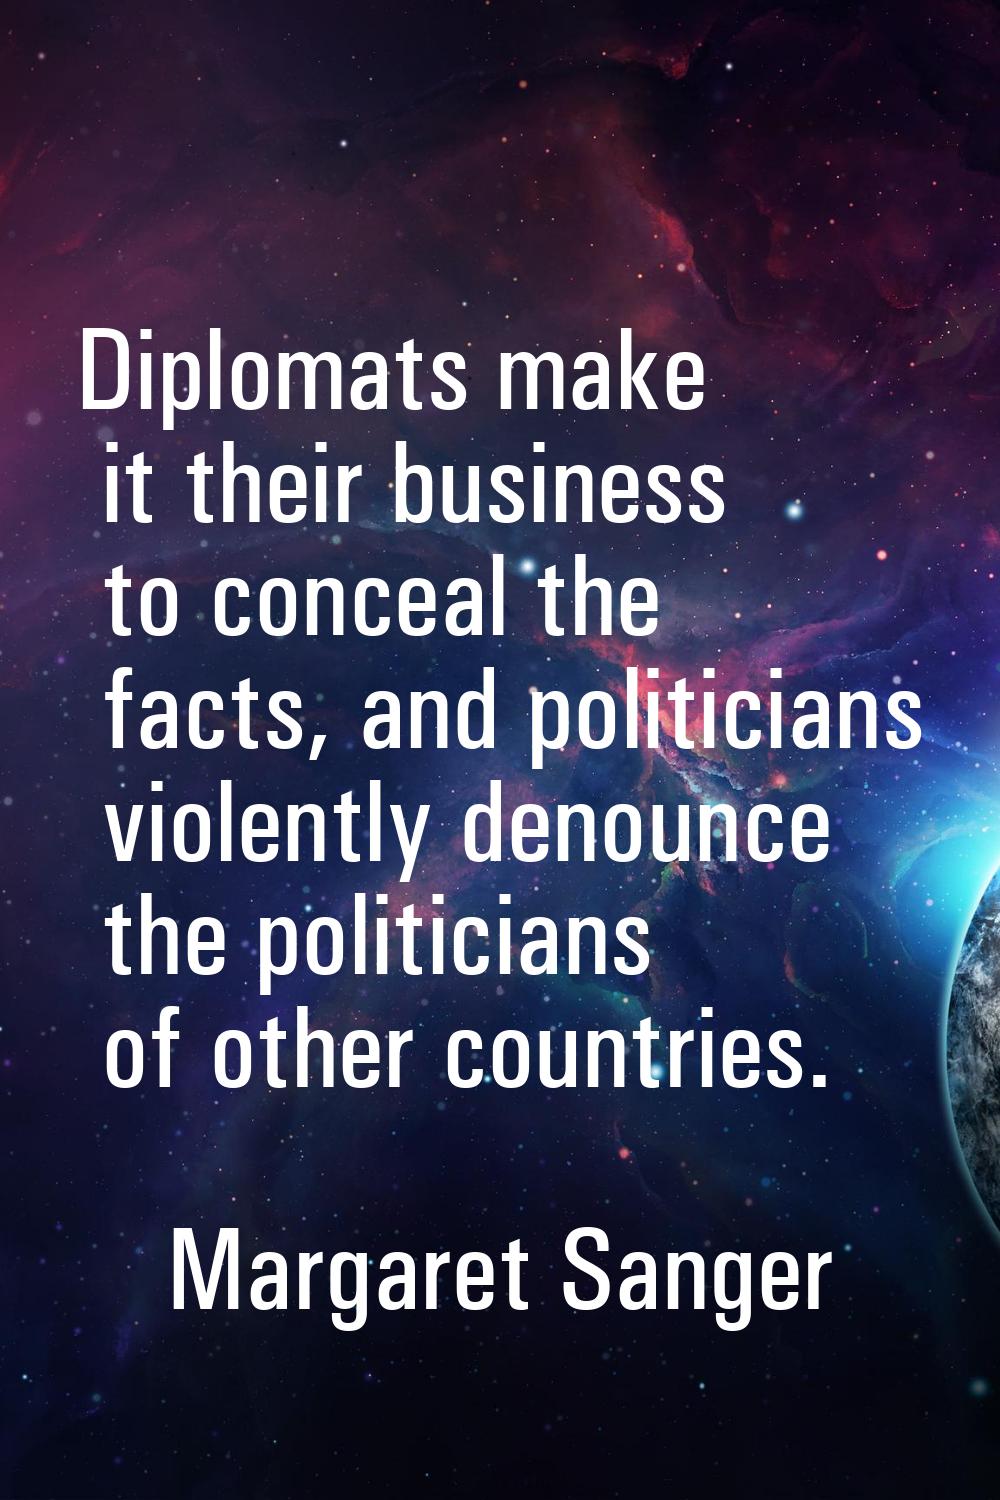 Diplomats make it their business to conceal the facts, and politicians violently denounce the polit